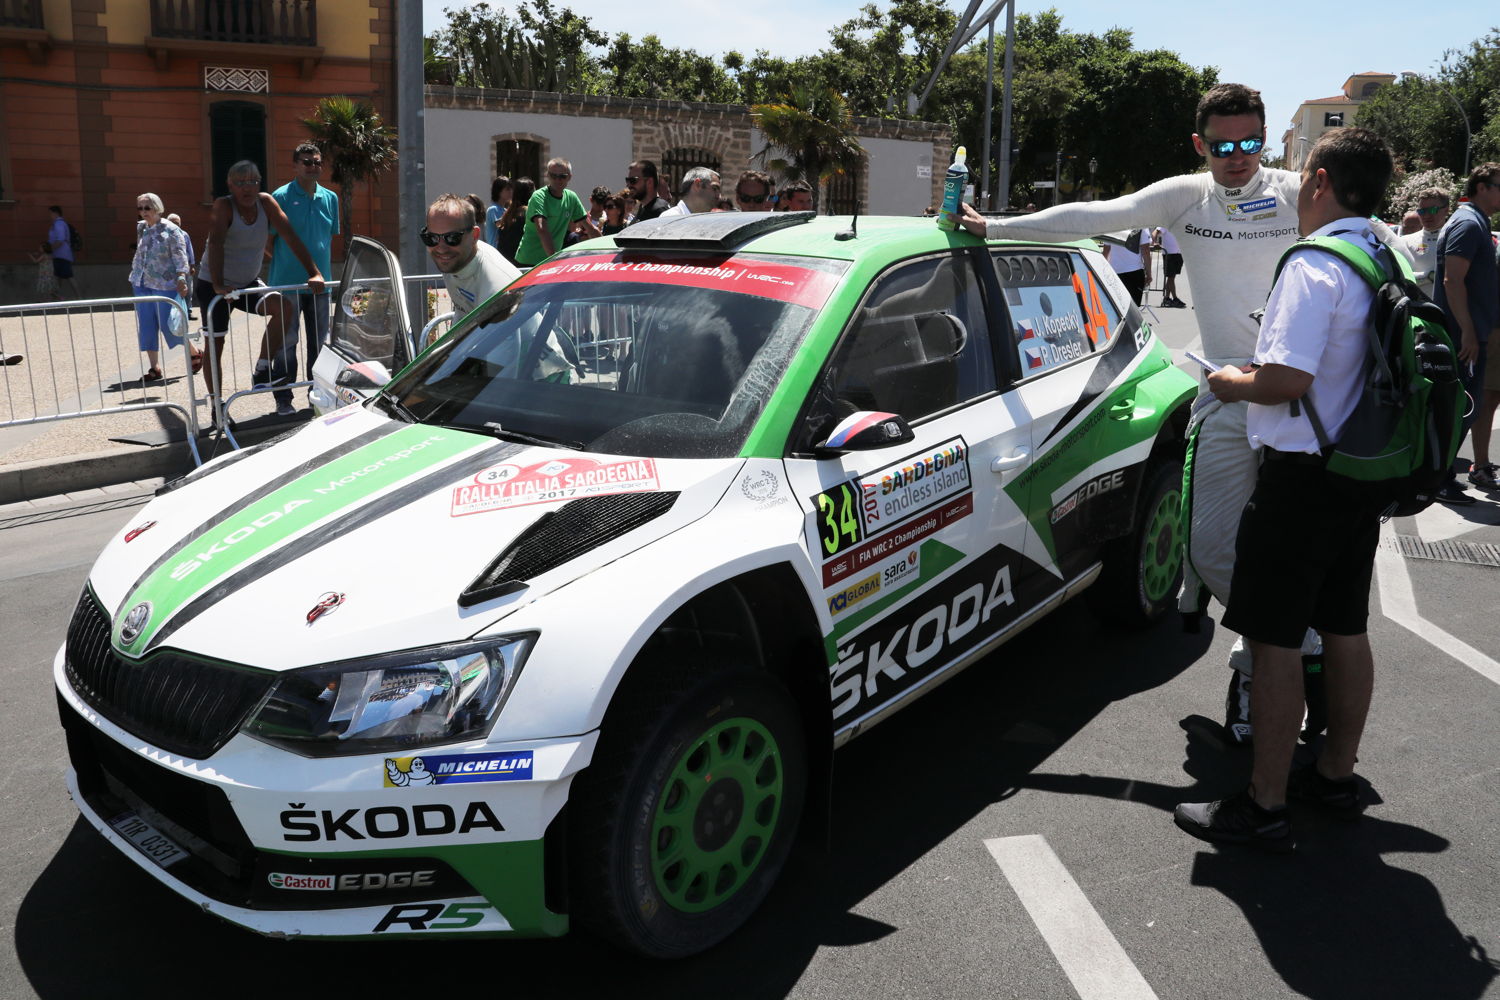 Jan Kopecký/Pavel Dresler (ŠKODA FABIA R5) want to climb with a win in WRC 2 at Rally Italia Sardegna on second position in the category standings